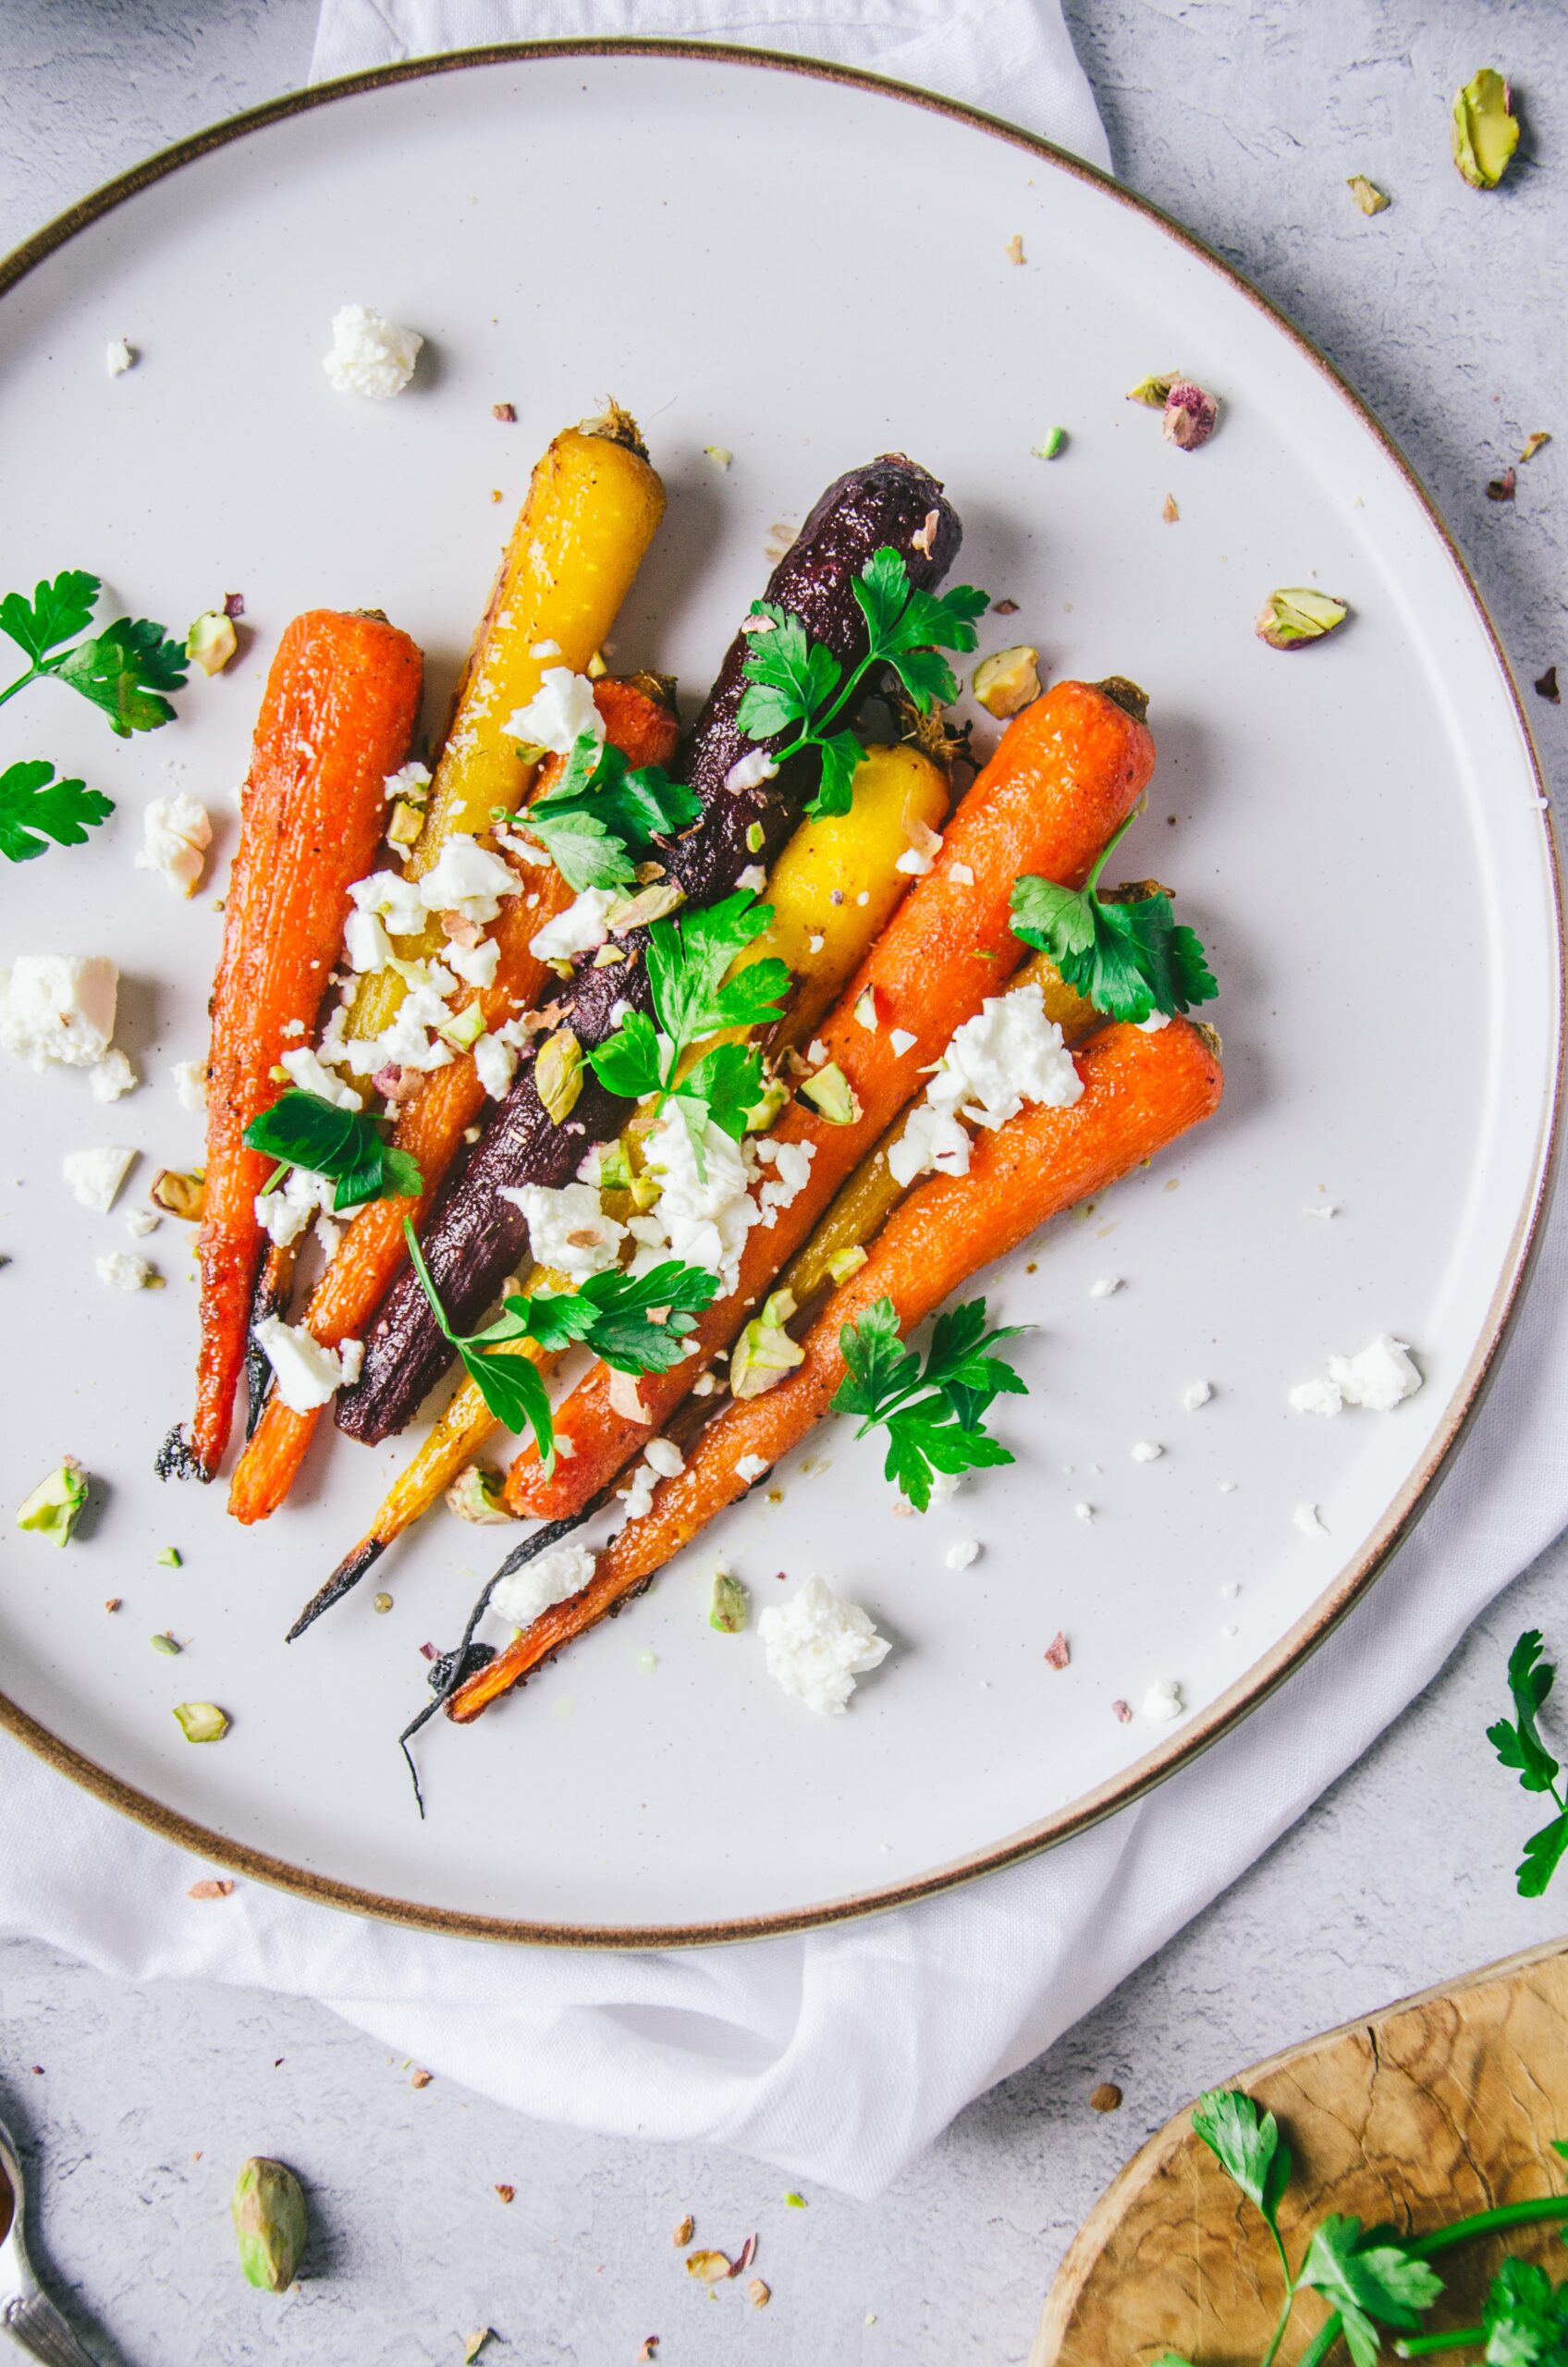 yellow orange roasted carrots with green herbs